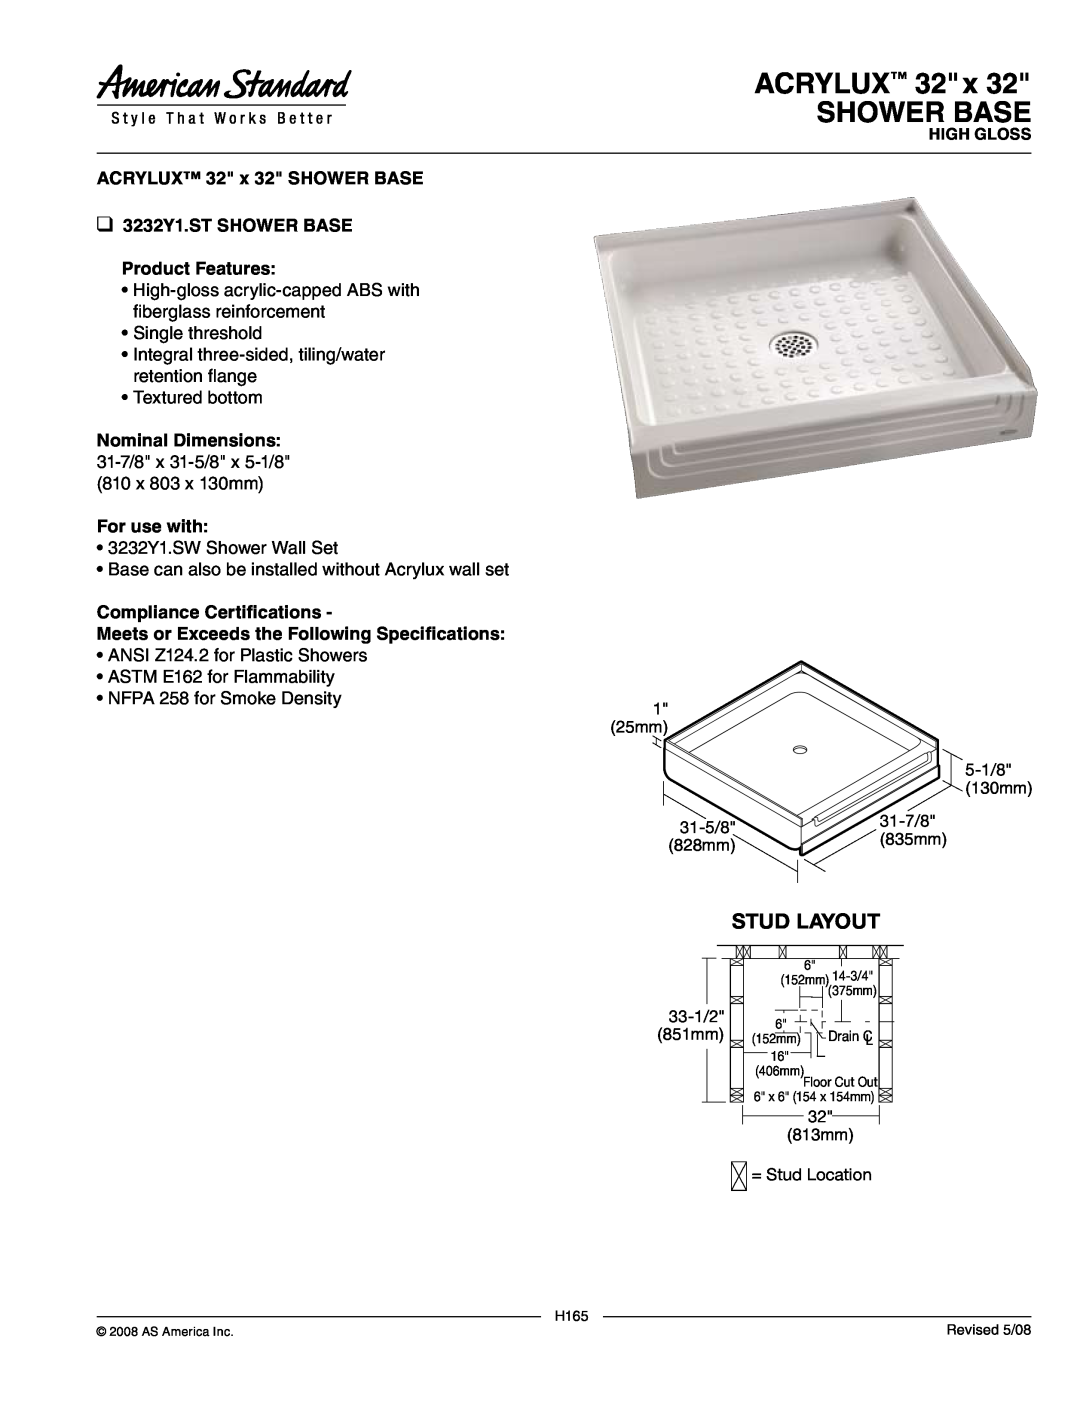 American Standard 3232Y1.ST dimensions ACRYLUX 32 x SHOWER BASE, Stud Layout, For use with, Compliance Certifications 